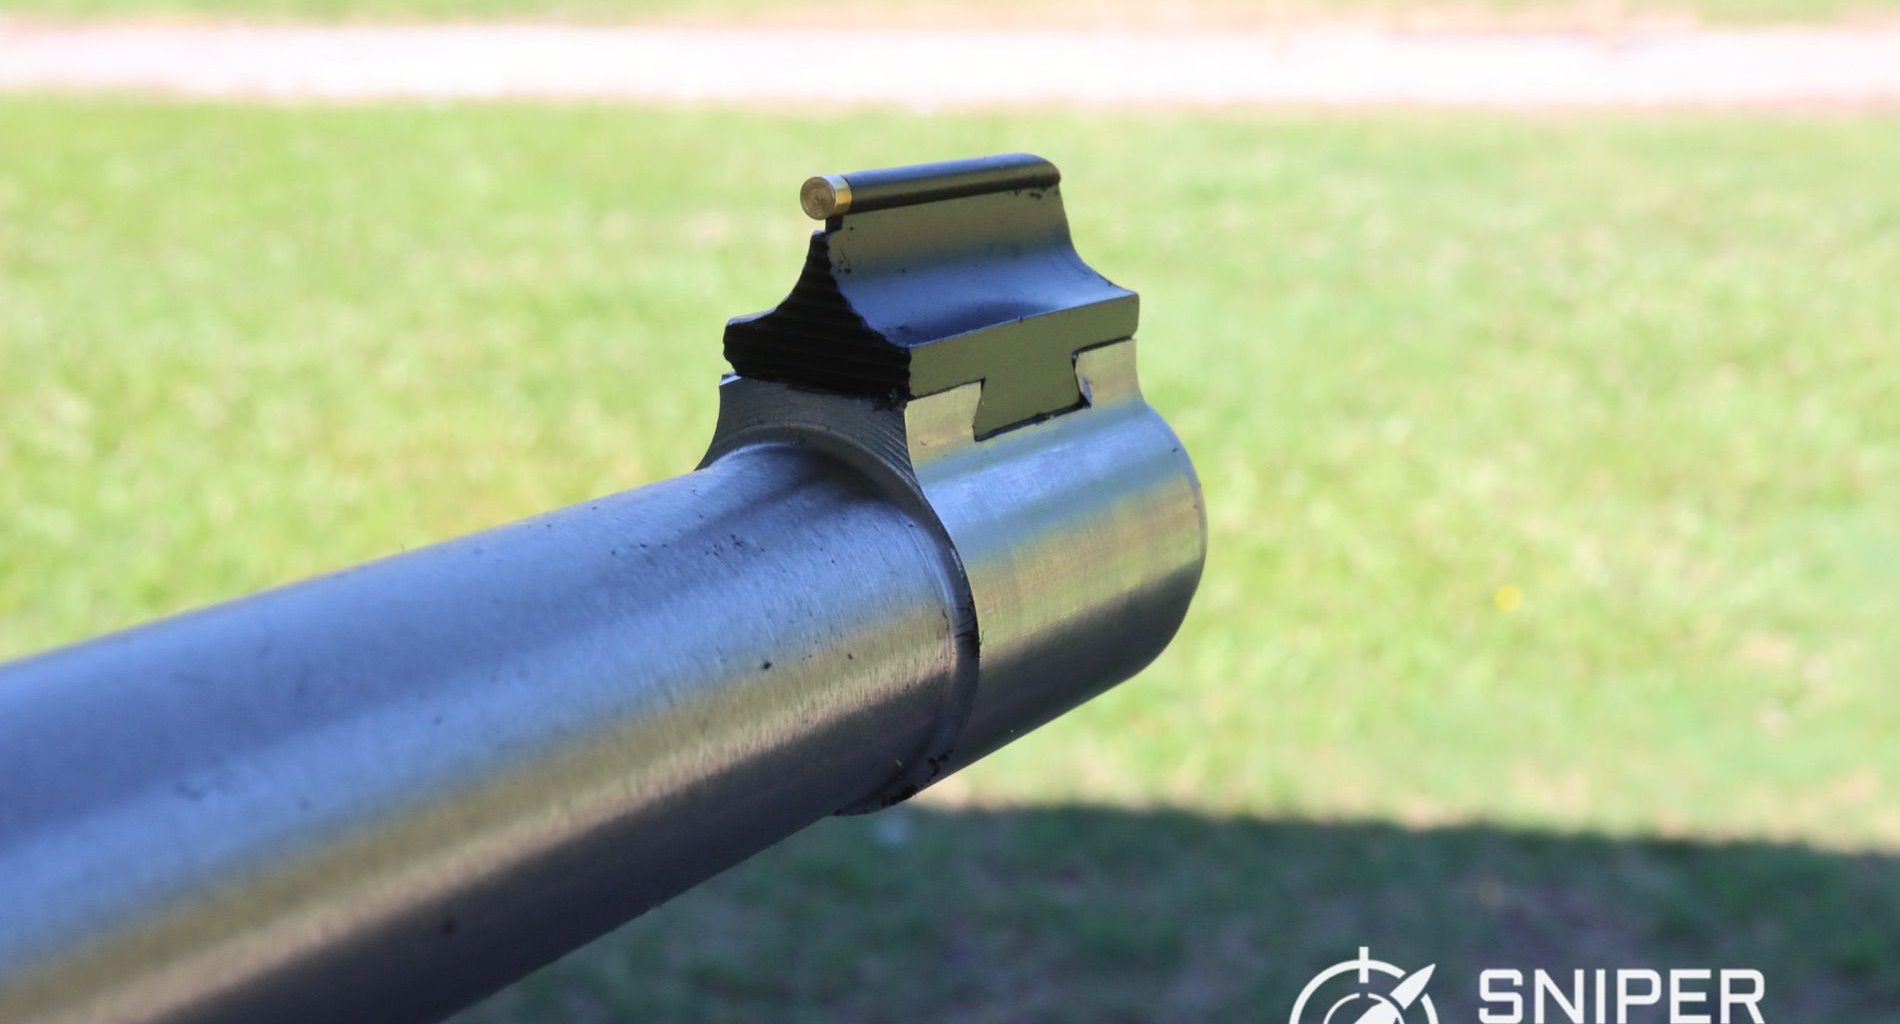 The business end of the Ruger 10:22 Takedown’s barrel, showing the dovetailed front sight. The brass dot provides a clear sight picture